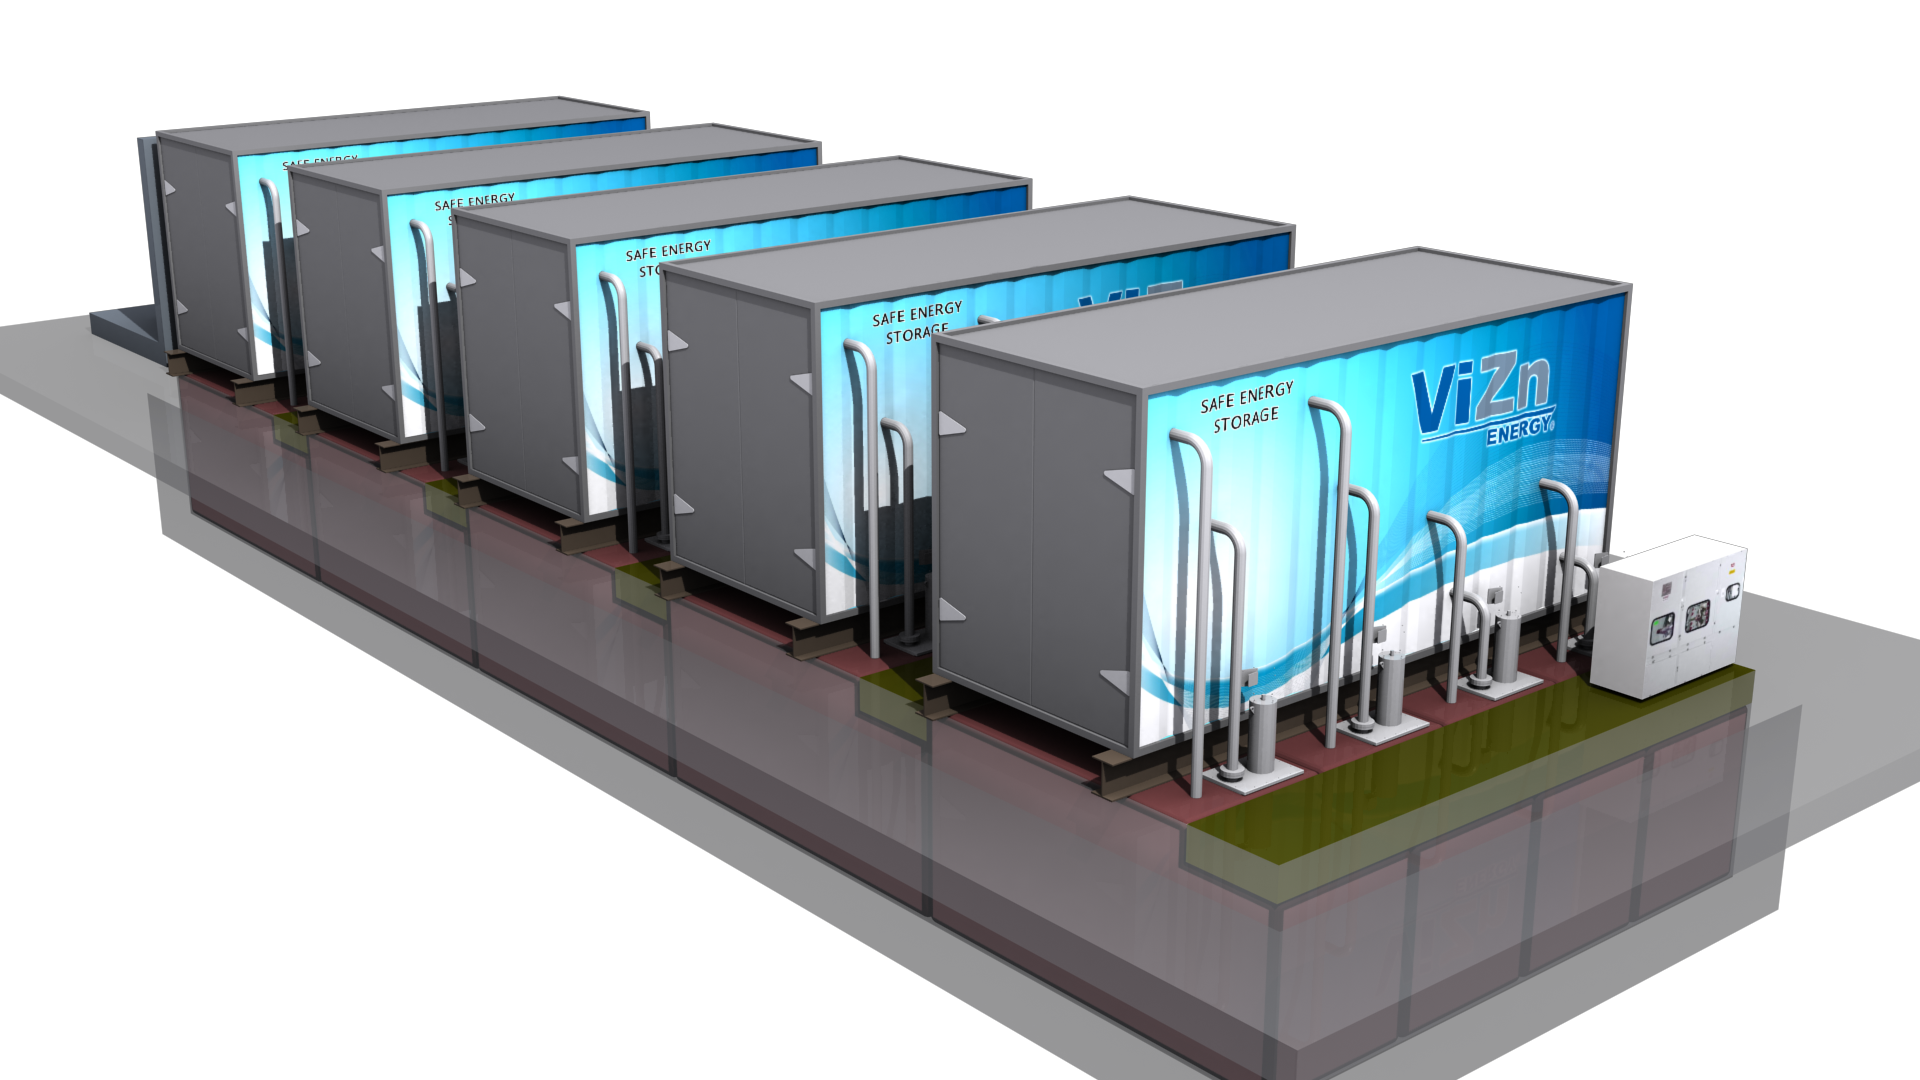 Where battery storage will take over from backup power plants